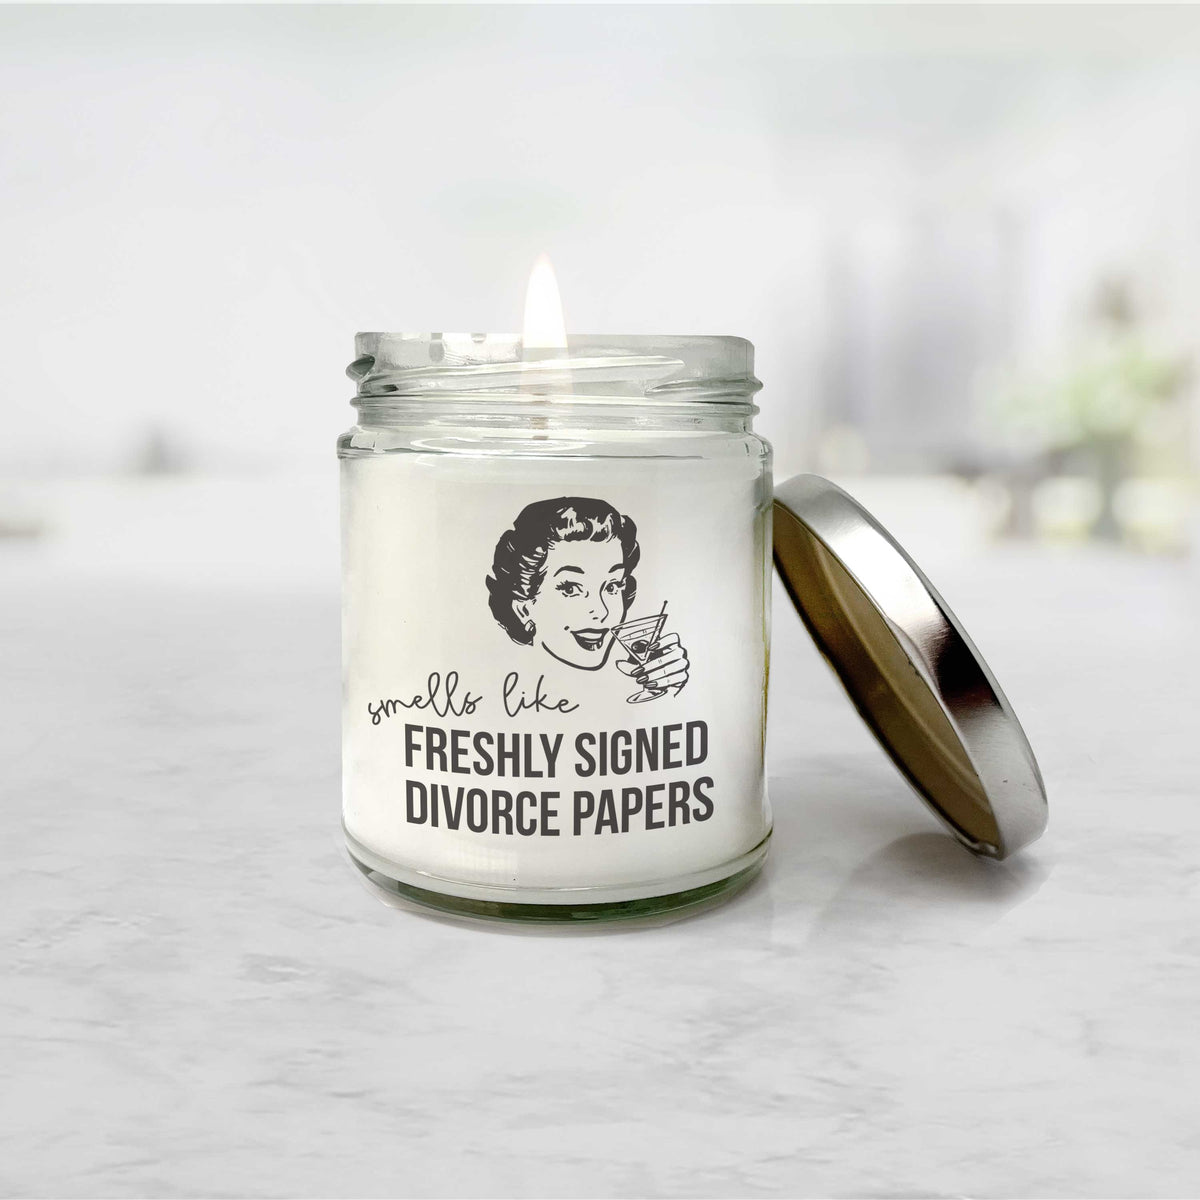 Funny Gifts, Let That Shit Go, Affirmation Candles, Anxiety Relief